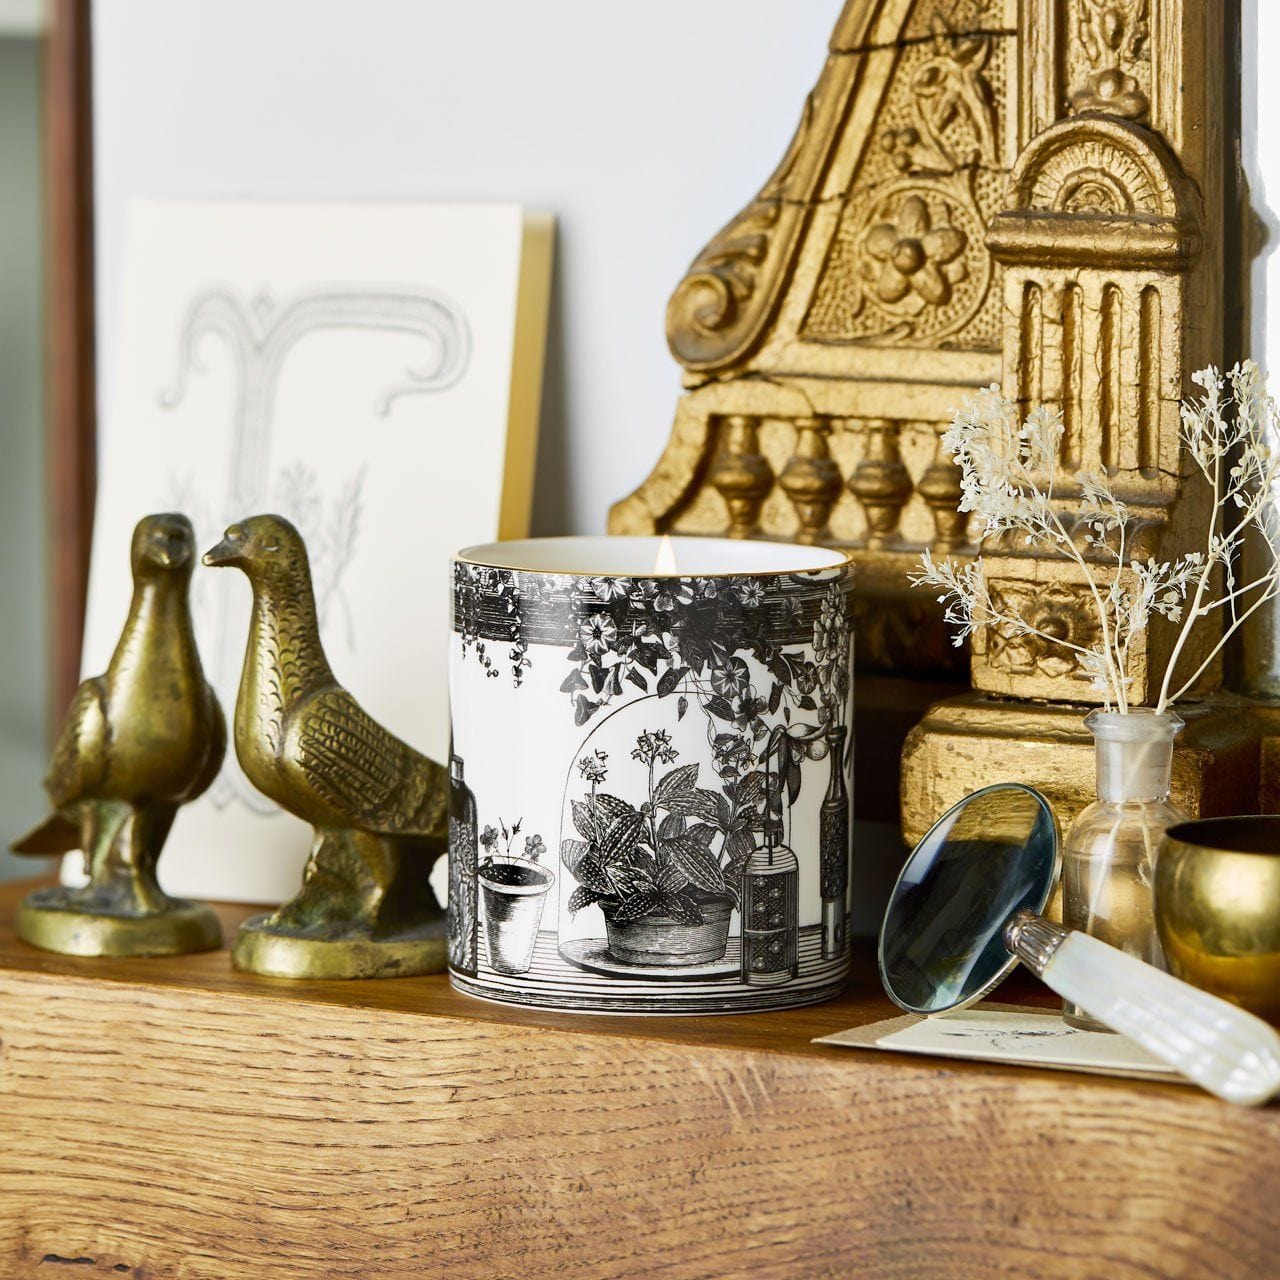 The Botanist Ceramic Candle - Chase and Wonder - Proudly Made in Britain